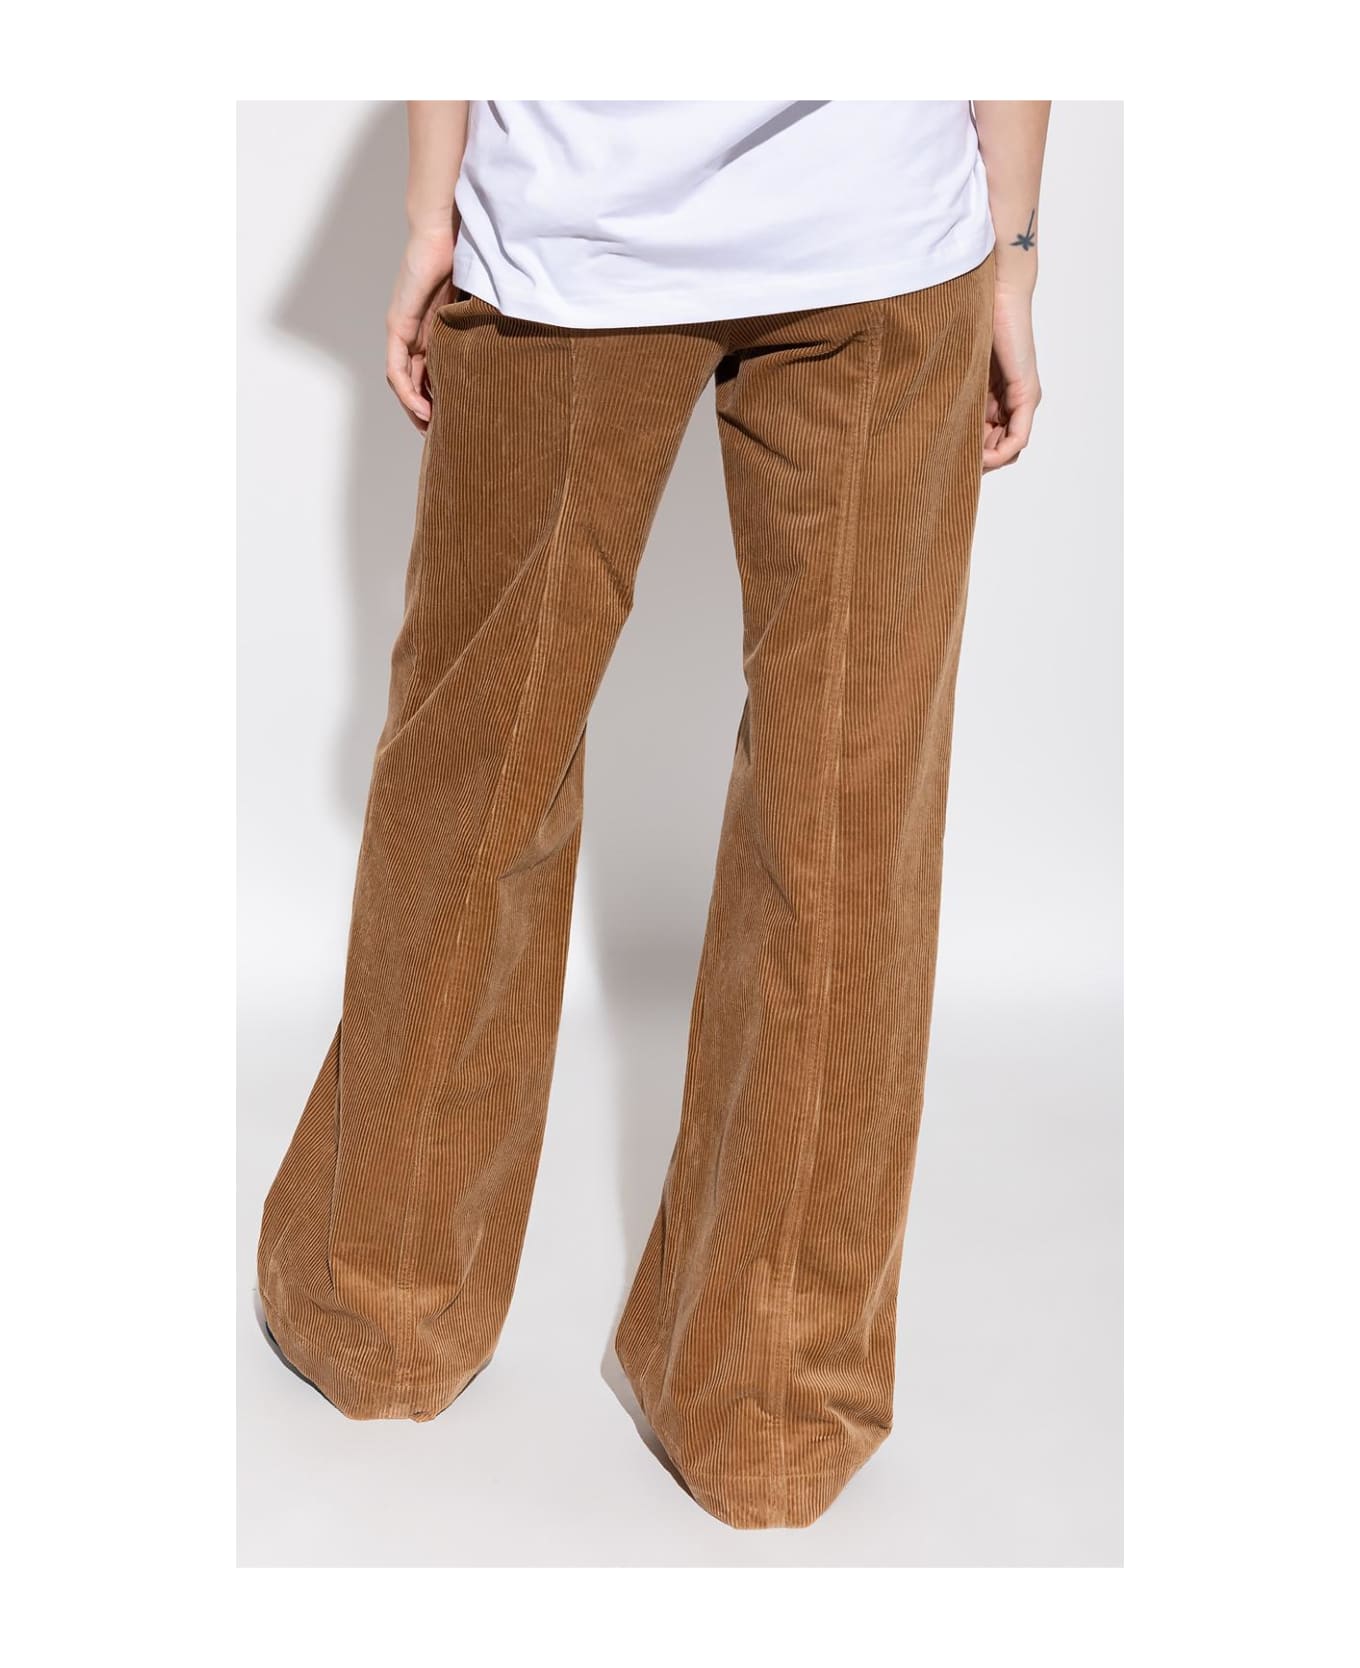 Burberry 'blakely' Corduroy Trousers - BROWN